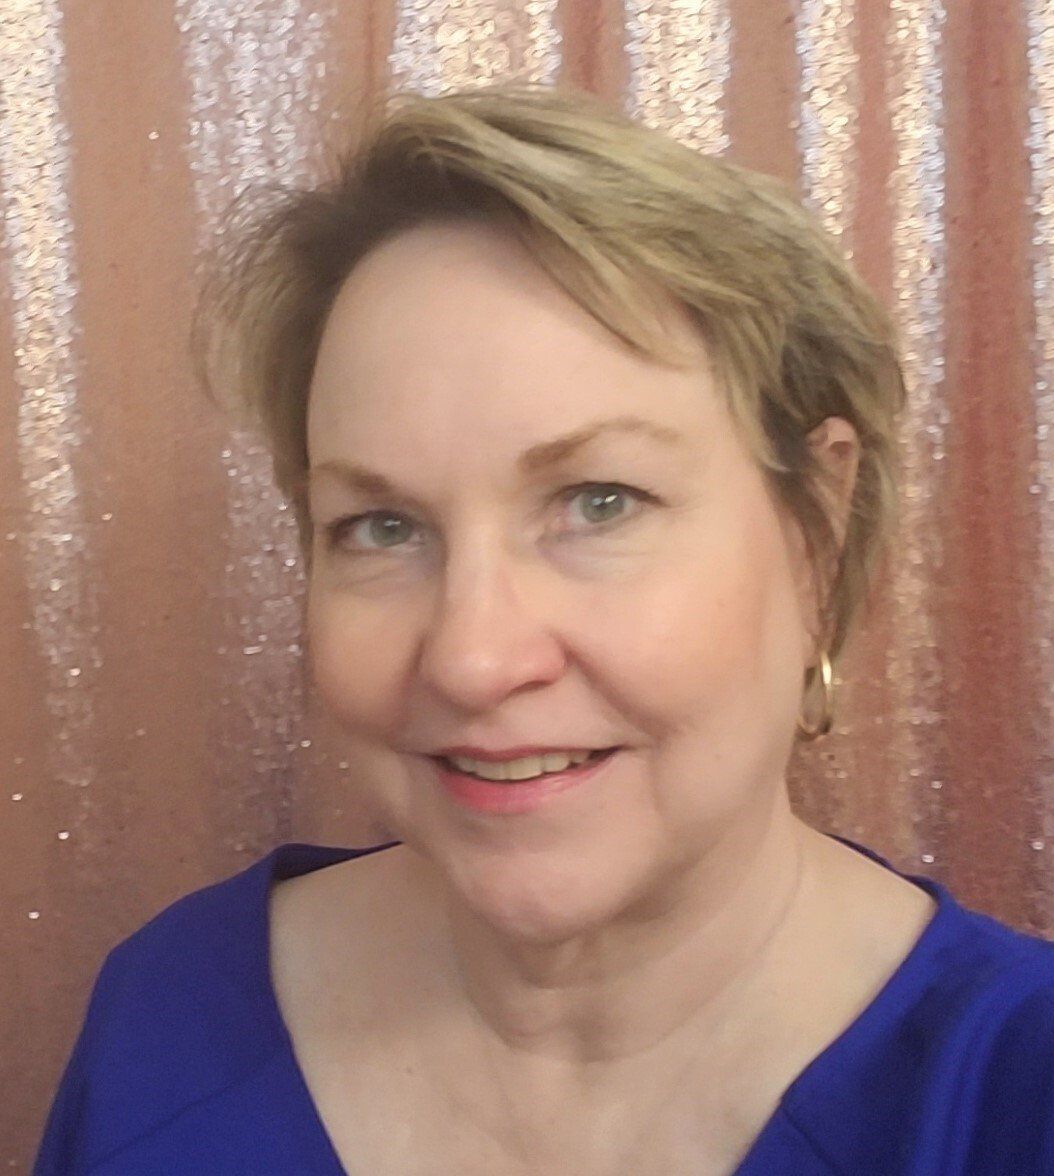 a woman in a blue shirt is smiling in front of a pink curtain .